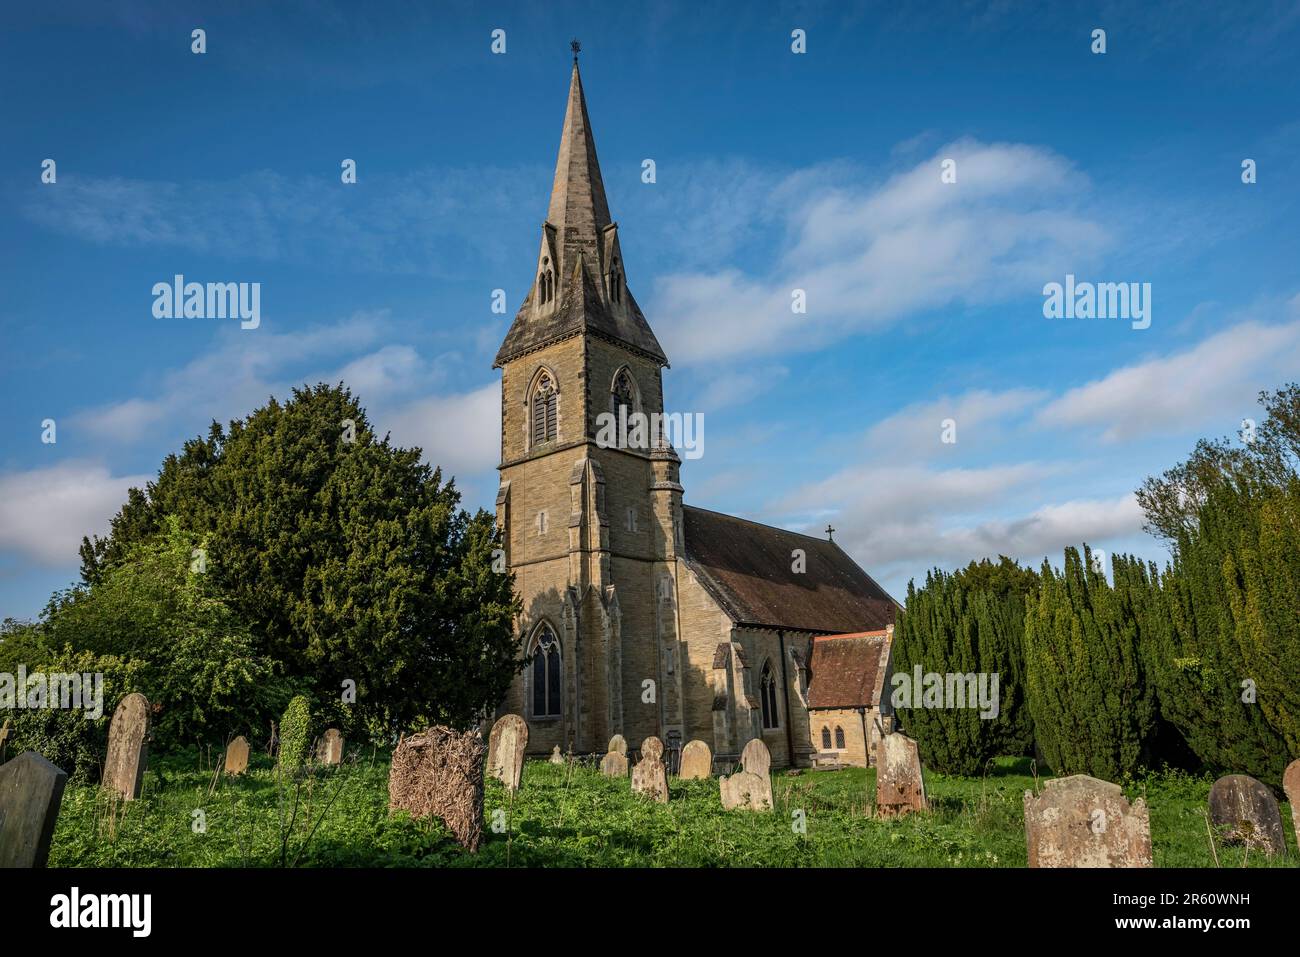 St James' Church, Warter in the Yorkshire Wolds, East Yorkshire, UK Stock Photo